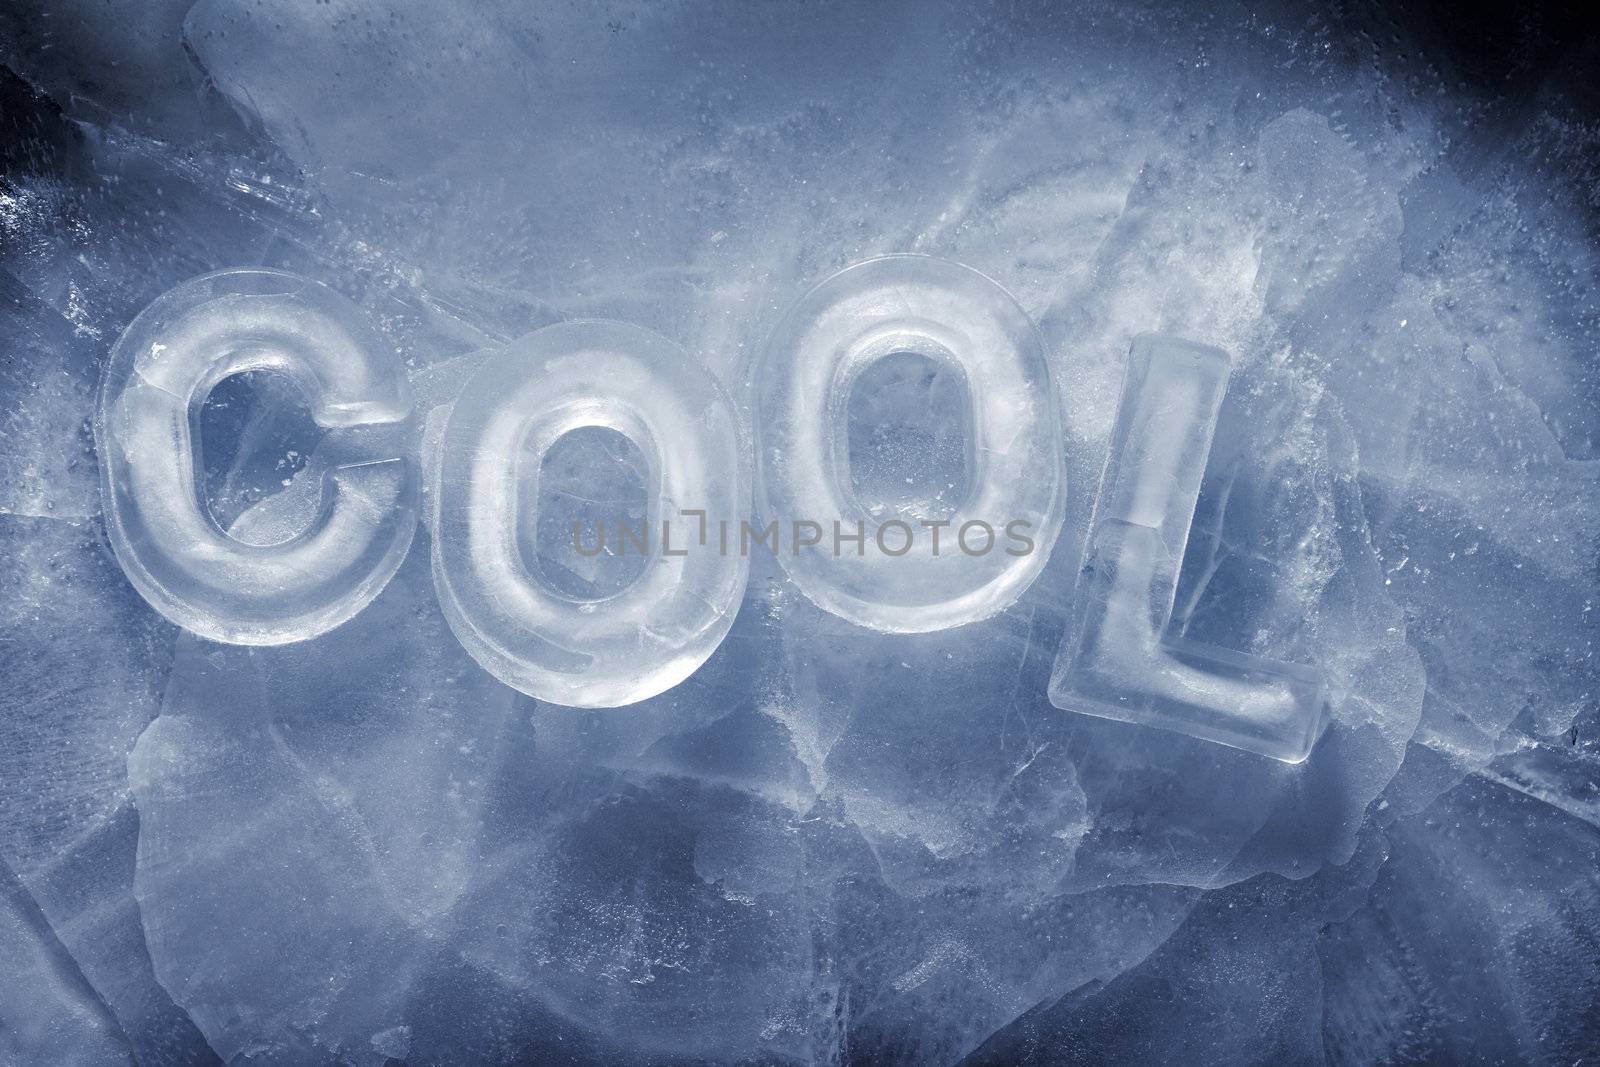 Word "Cool" written with real ice letters.